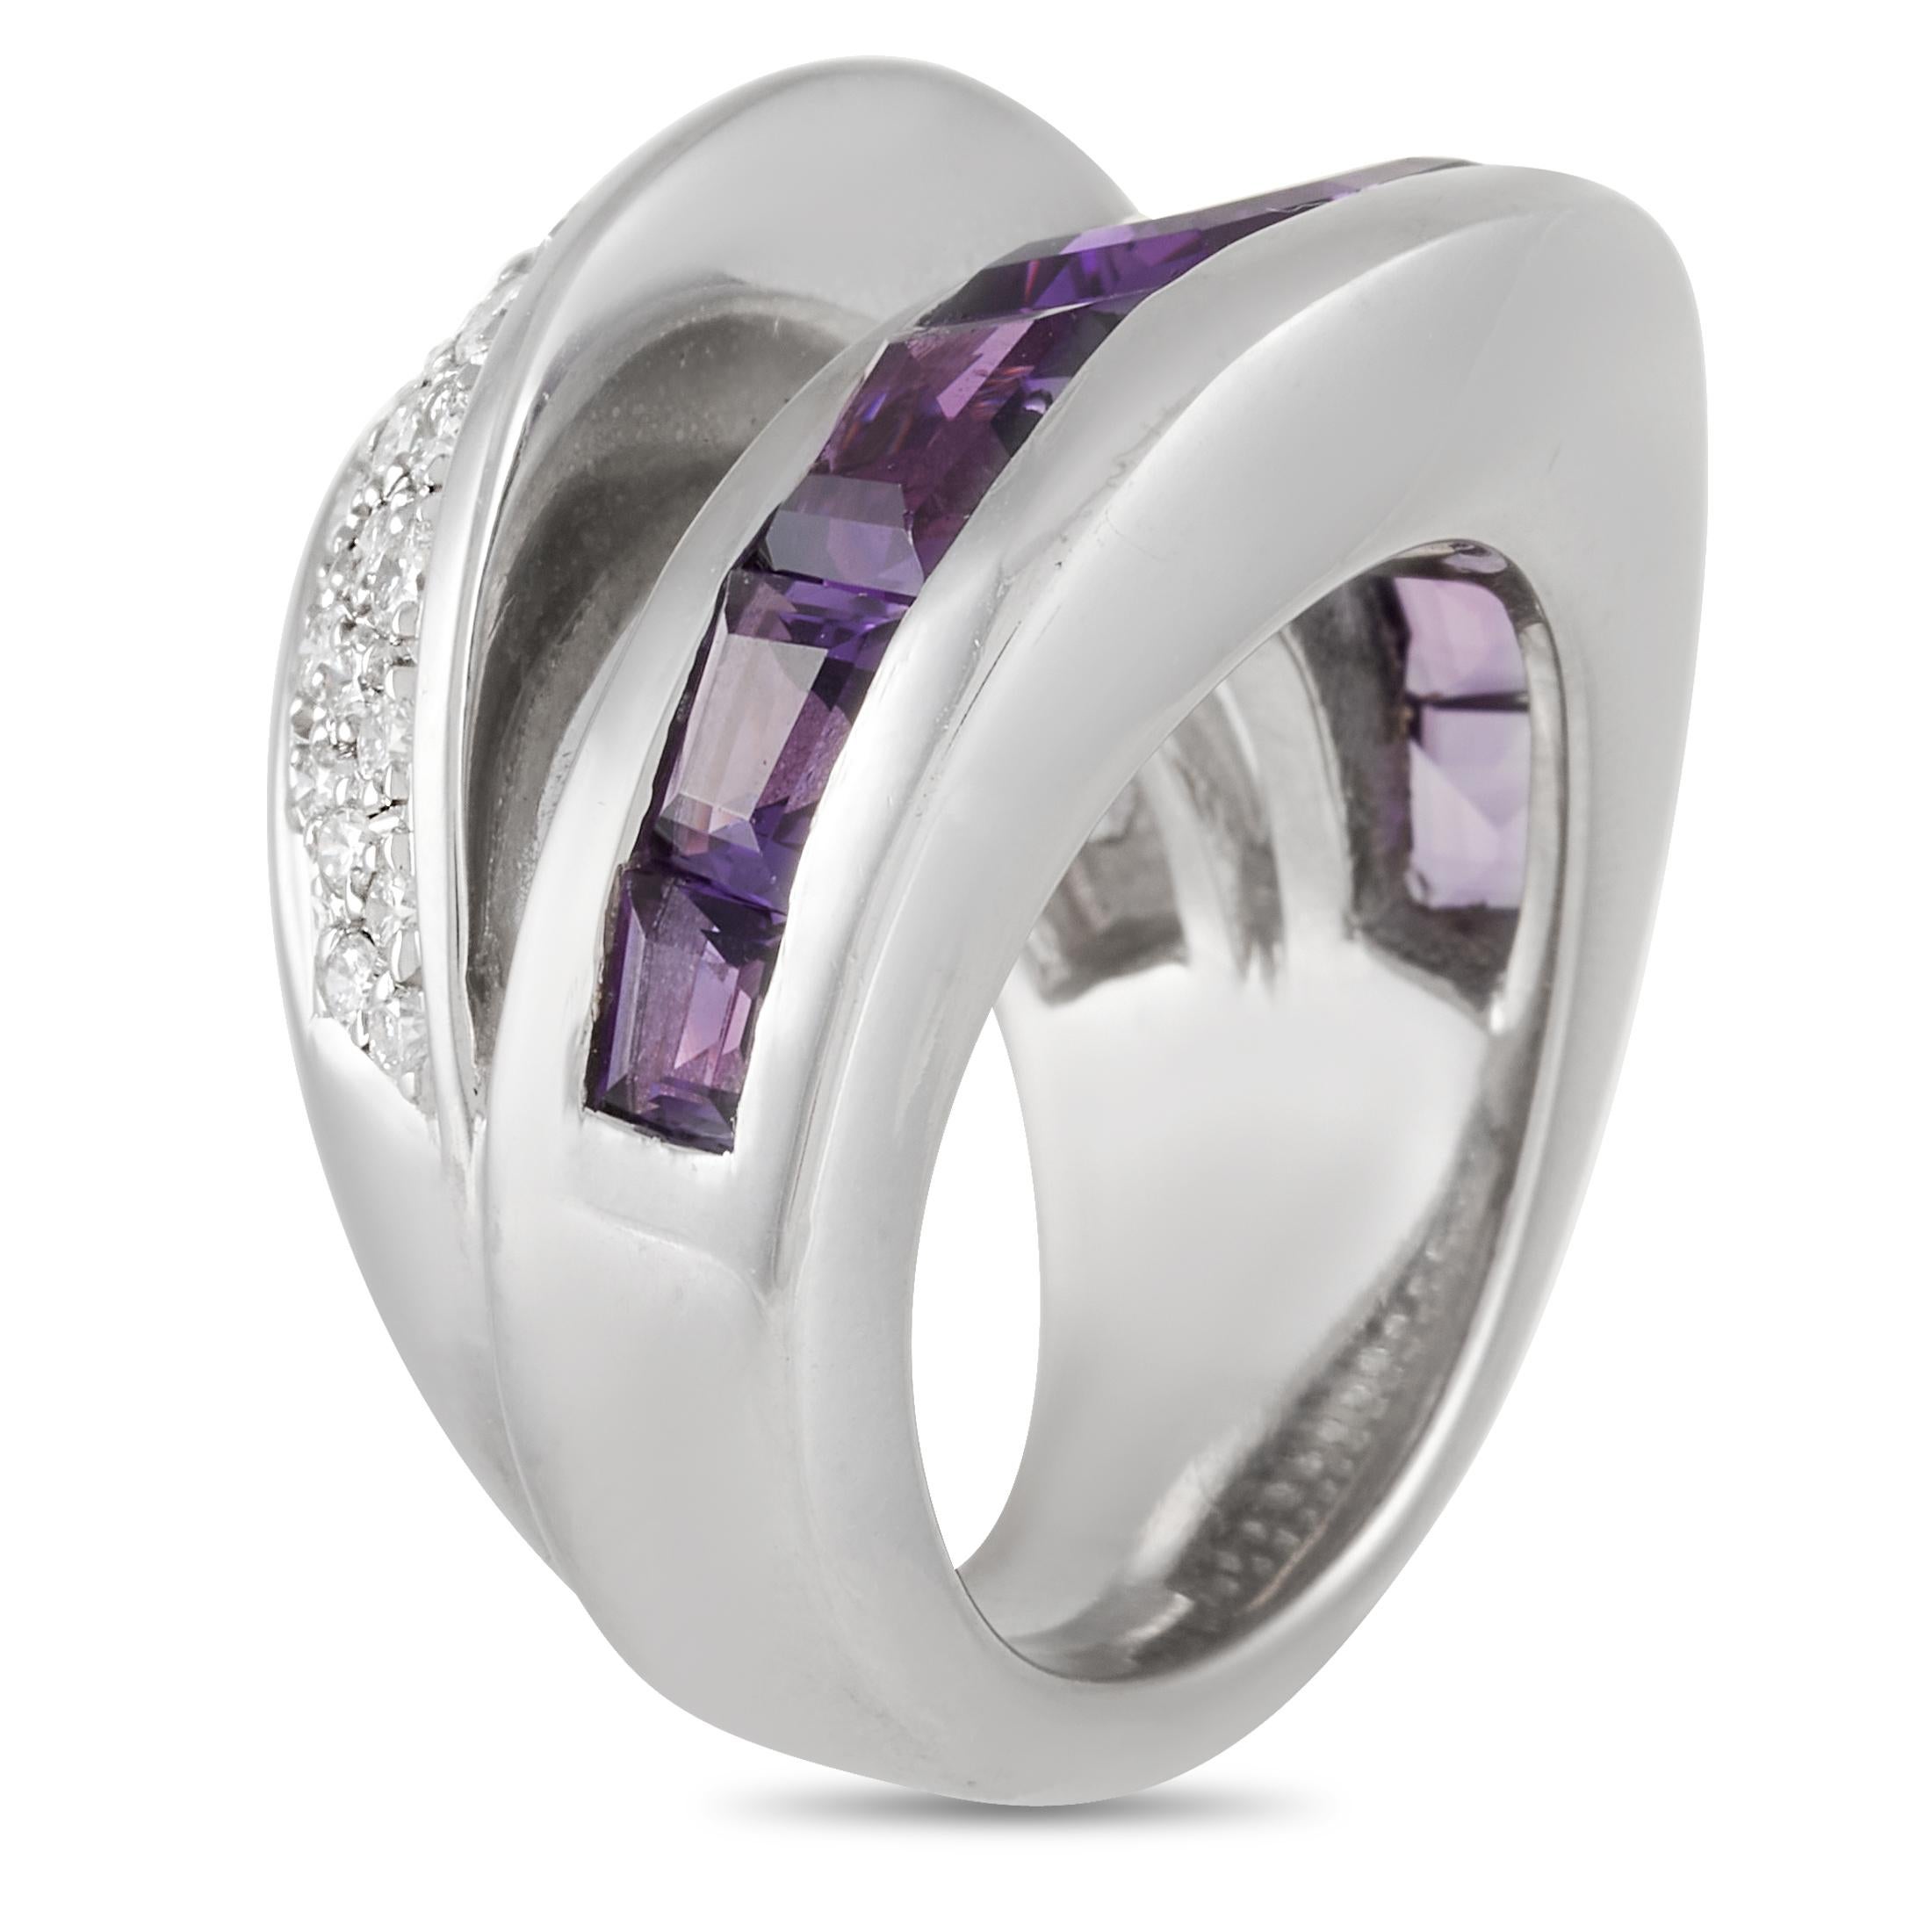 This Vasari 18K White Gold 1.25 ct Diamond 6.5 ct Amethyst Ring is very unique. The band is made with 18K white gold set with 1.25 carats of small round cut diamonds and 8.5 carats of stunning purple amethysts. The ring has a band thickness of 6 mm,